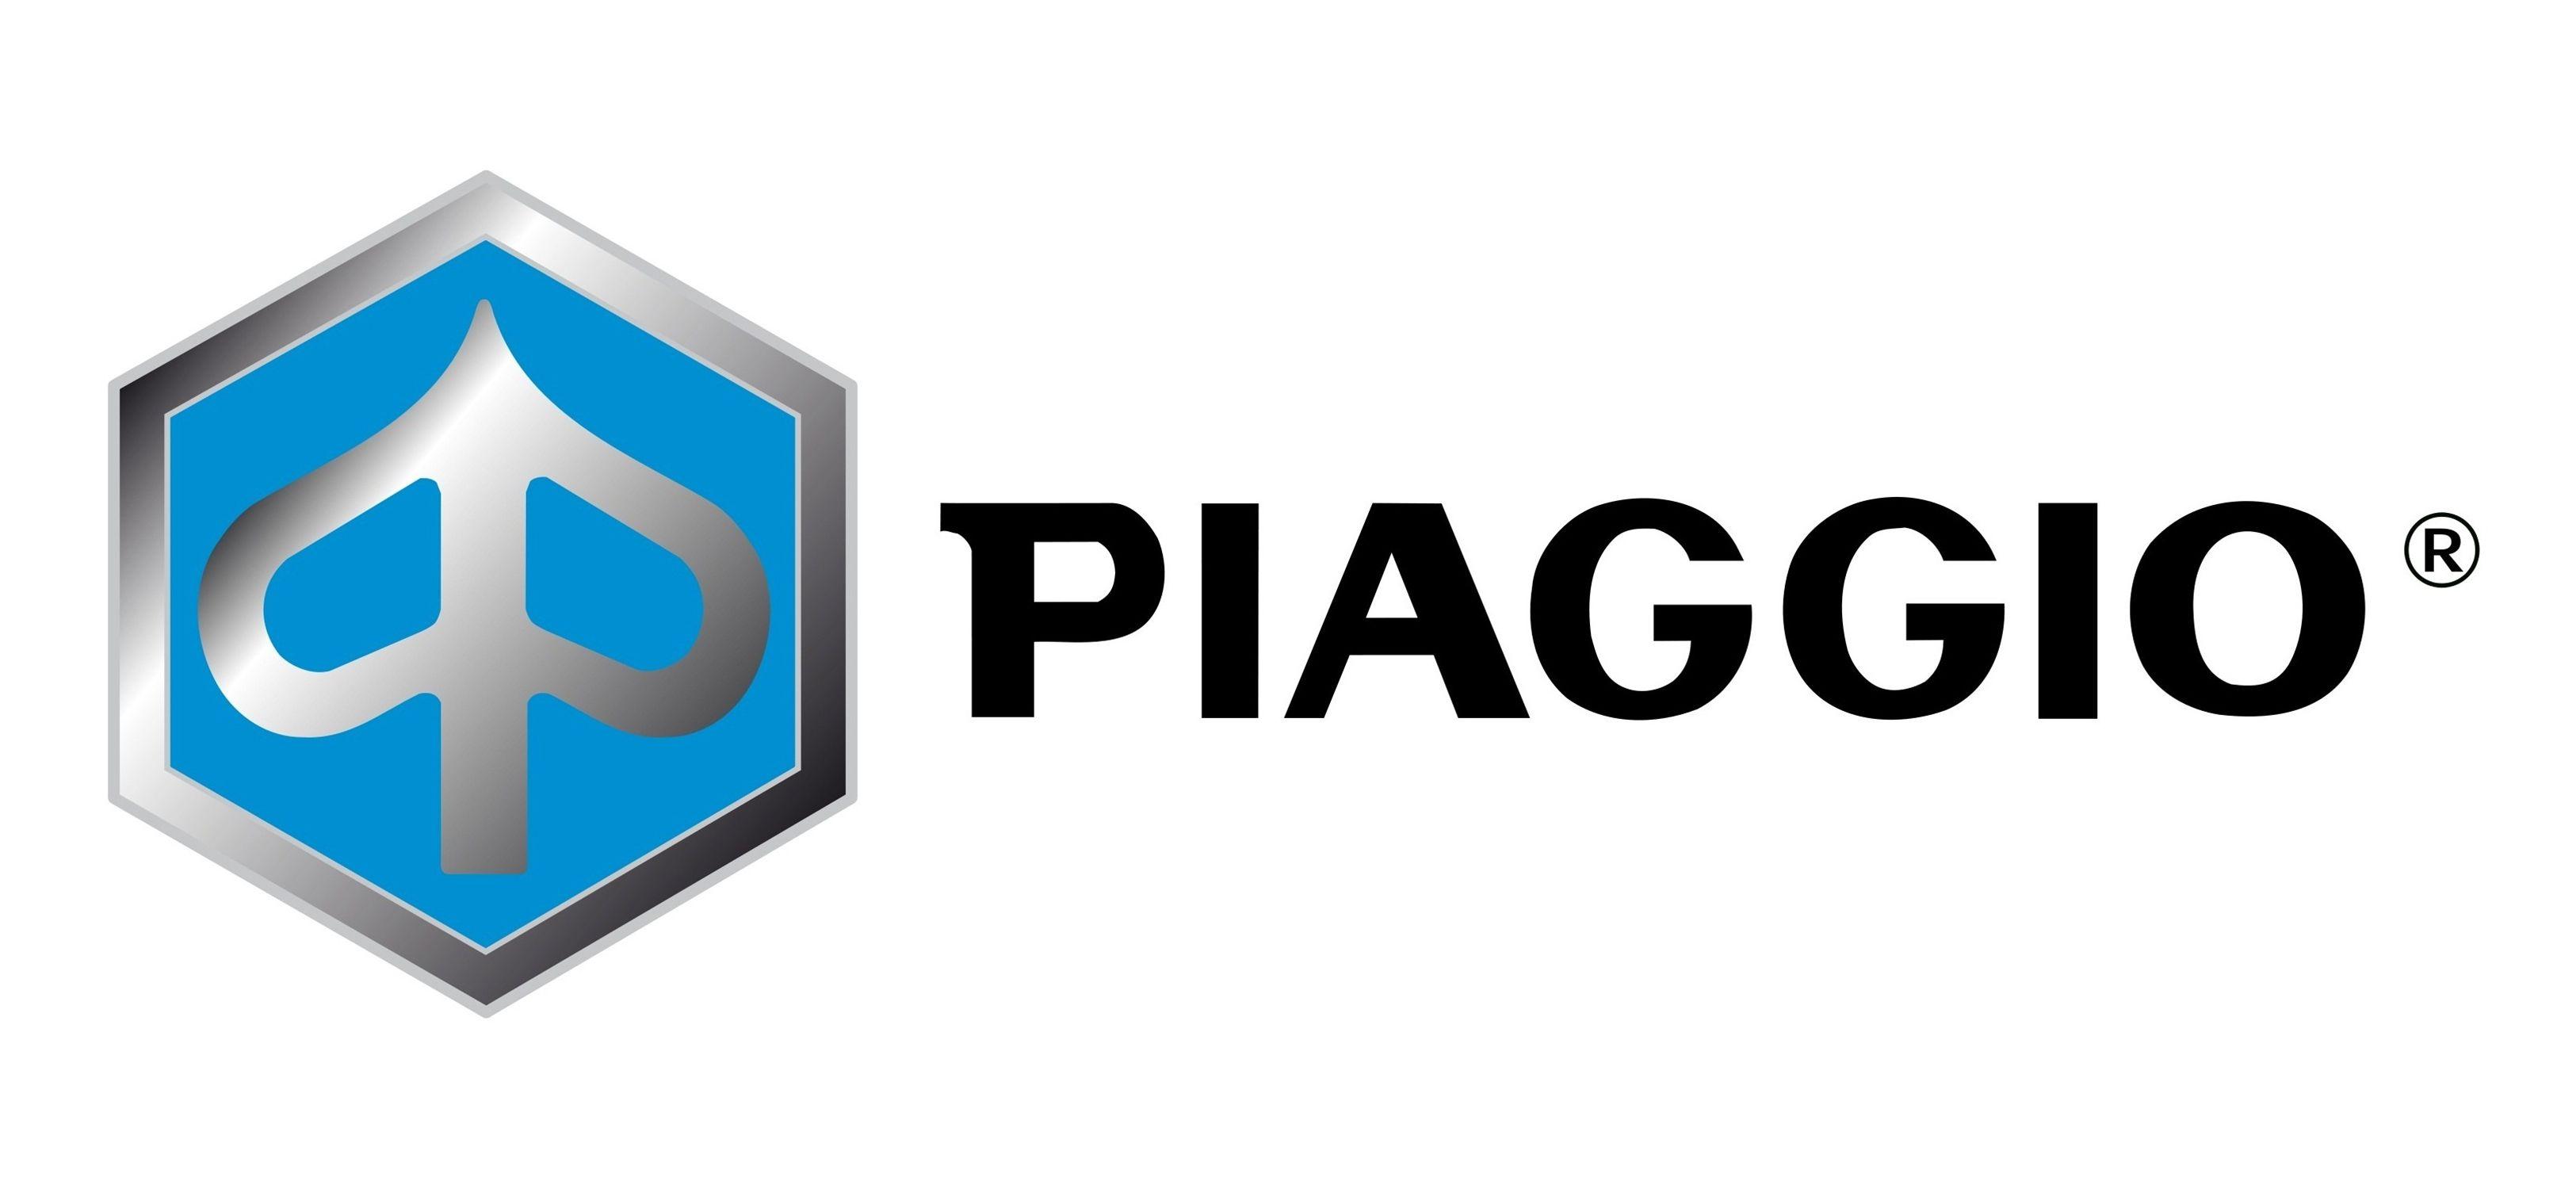 Piaggio Logo - Piaggio Logo Meaning and History, latest models | World Cars Brands